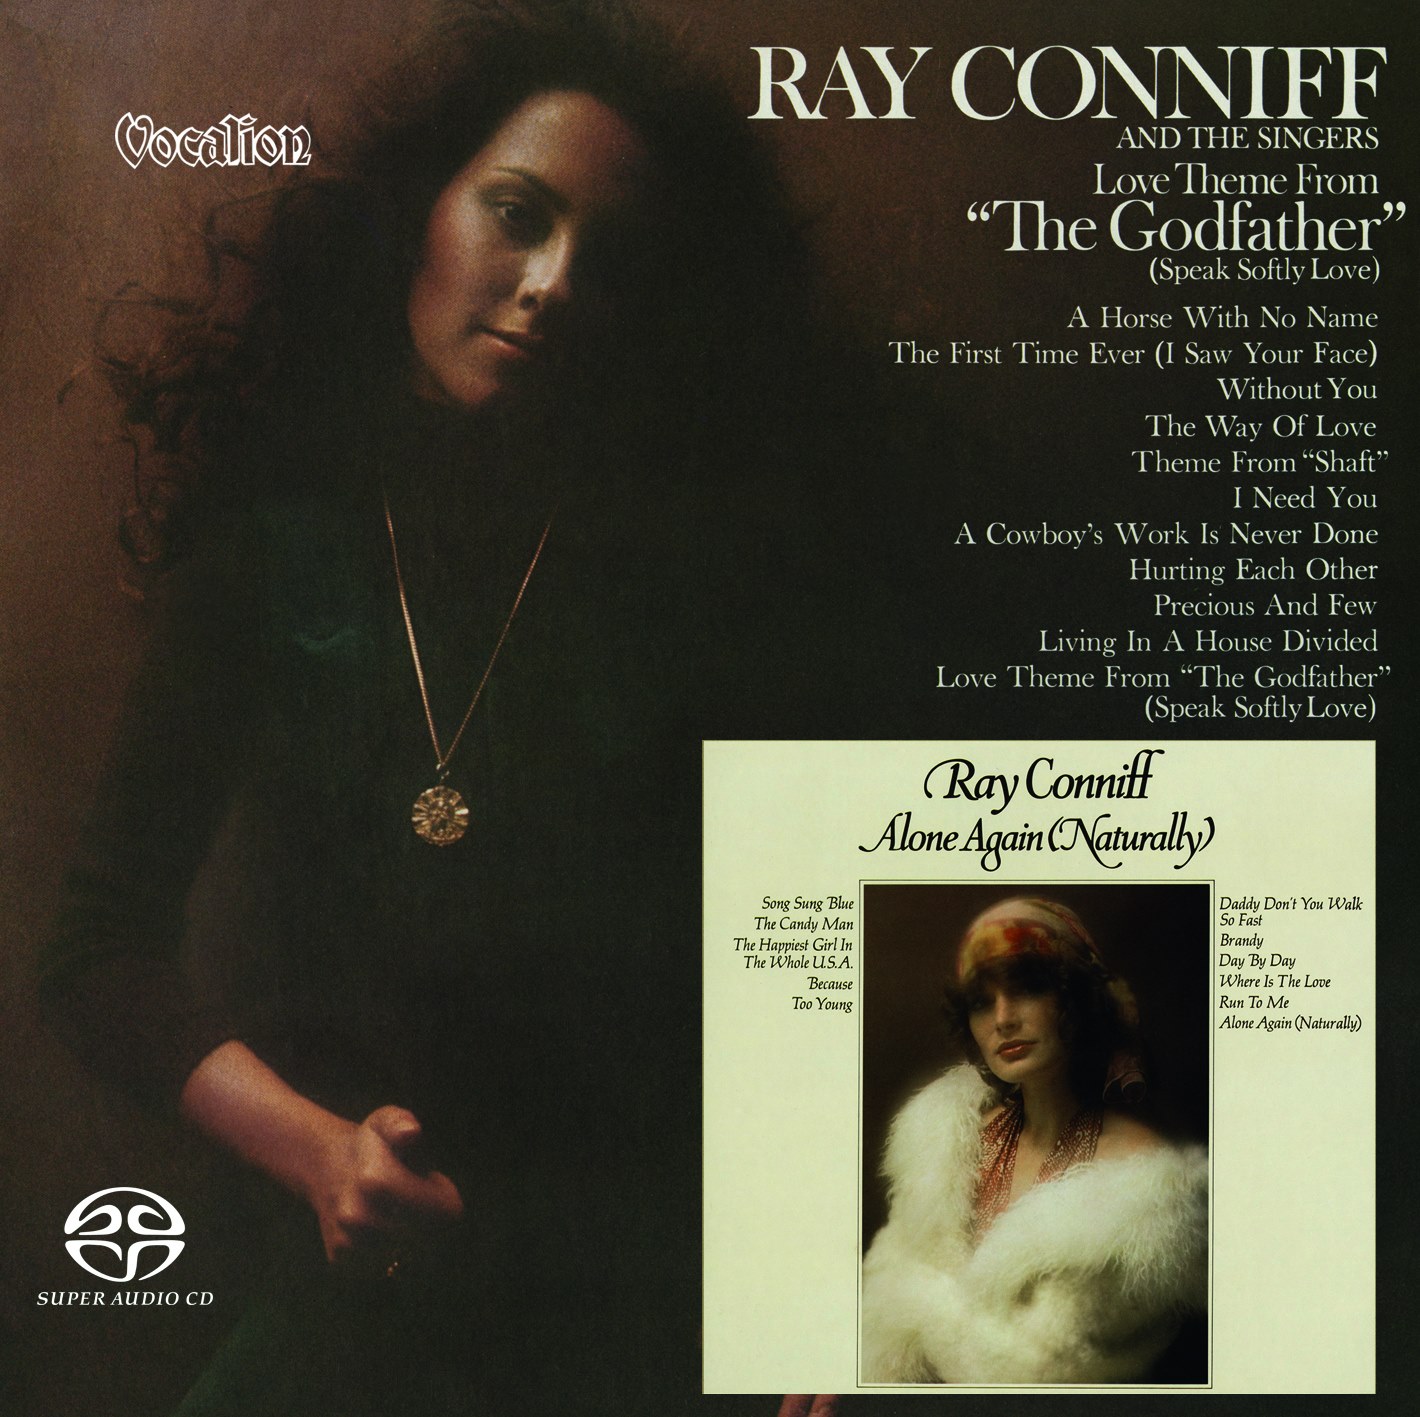 new Ray Conniff SACD: Alone Again (Naturally) & Love Theme from The Godfather